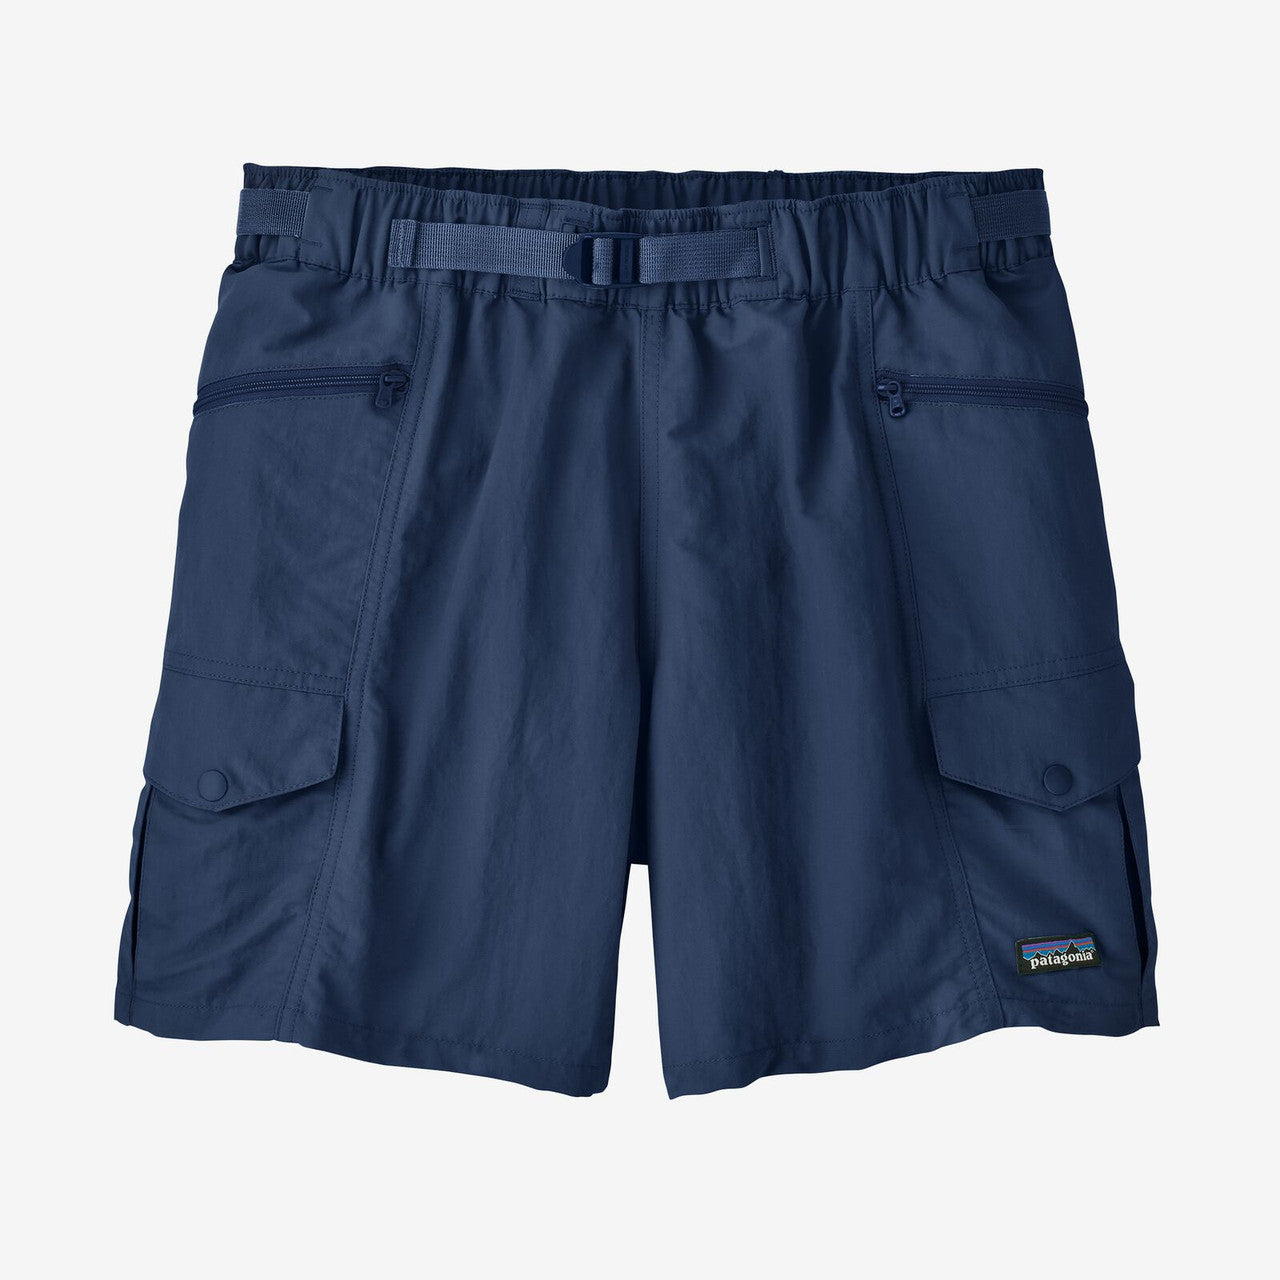 Ws Outdoor Everyday Shorts